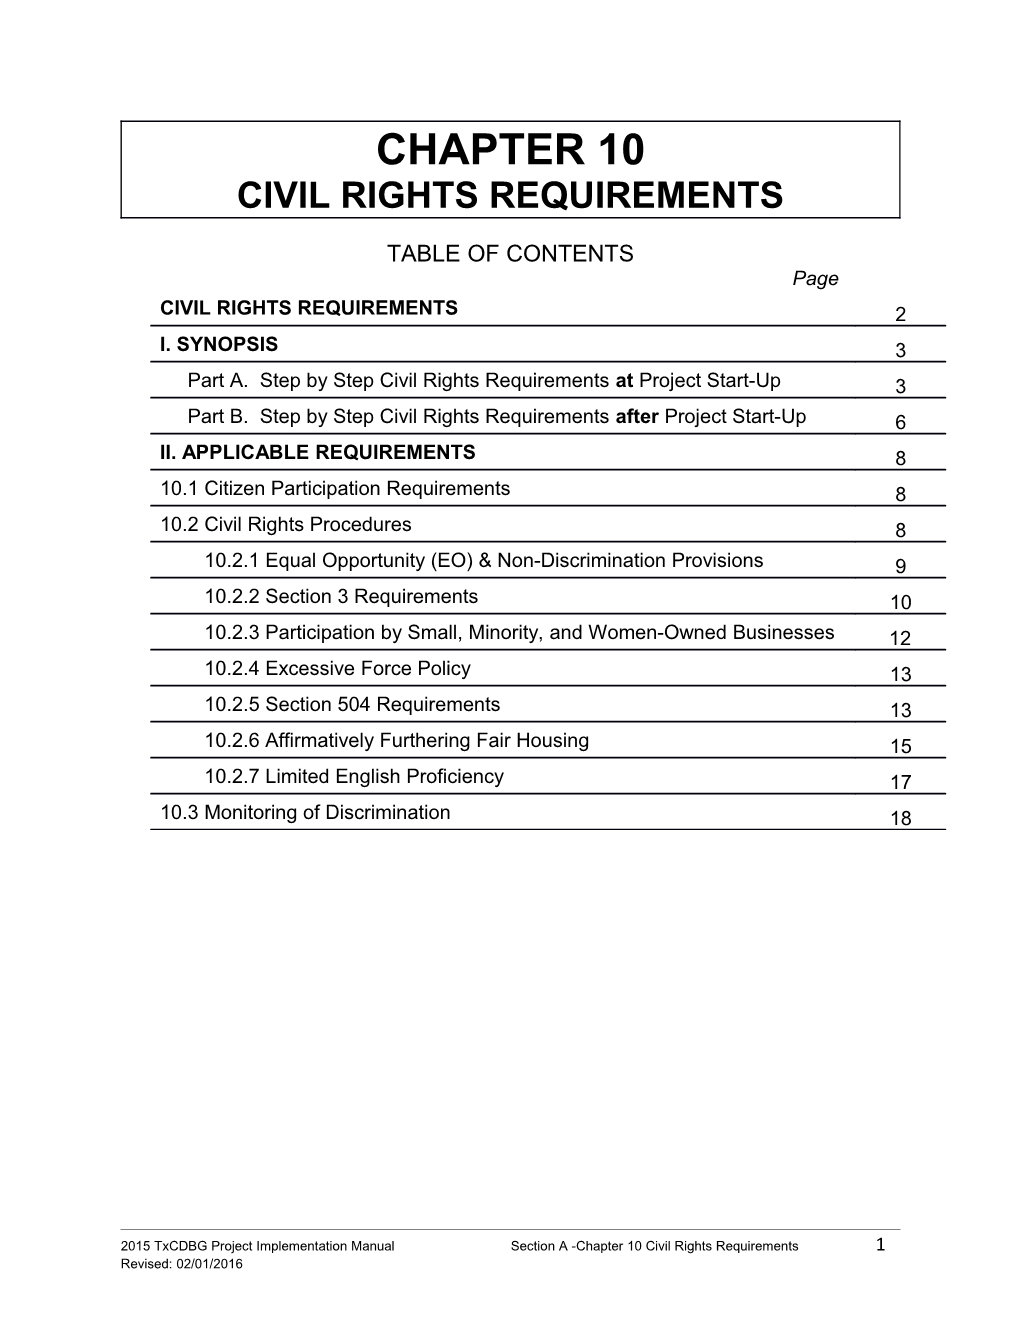 Civil Rights Requirements